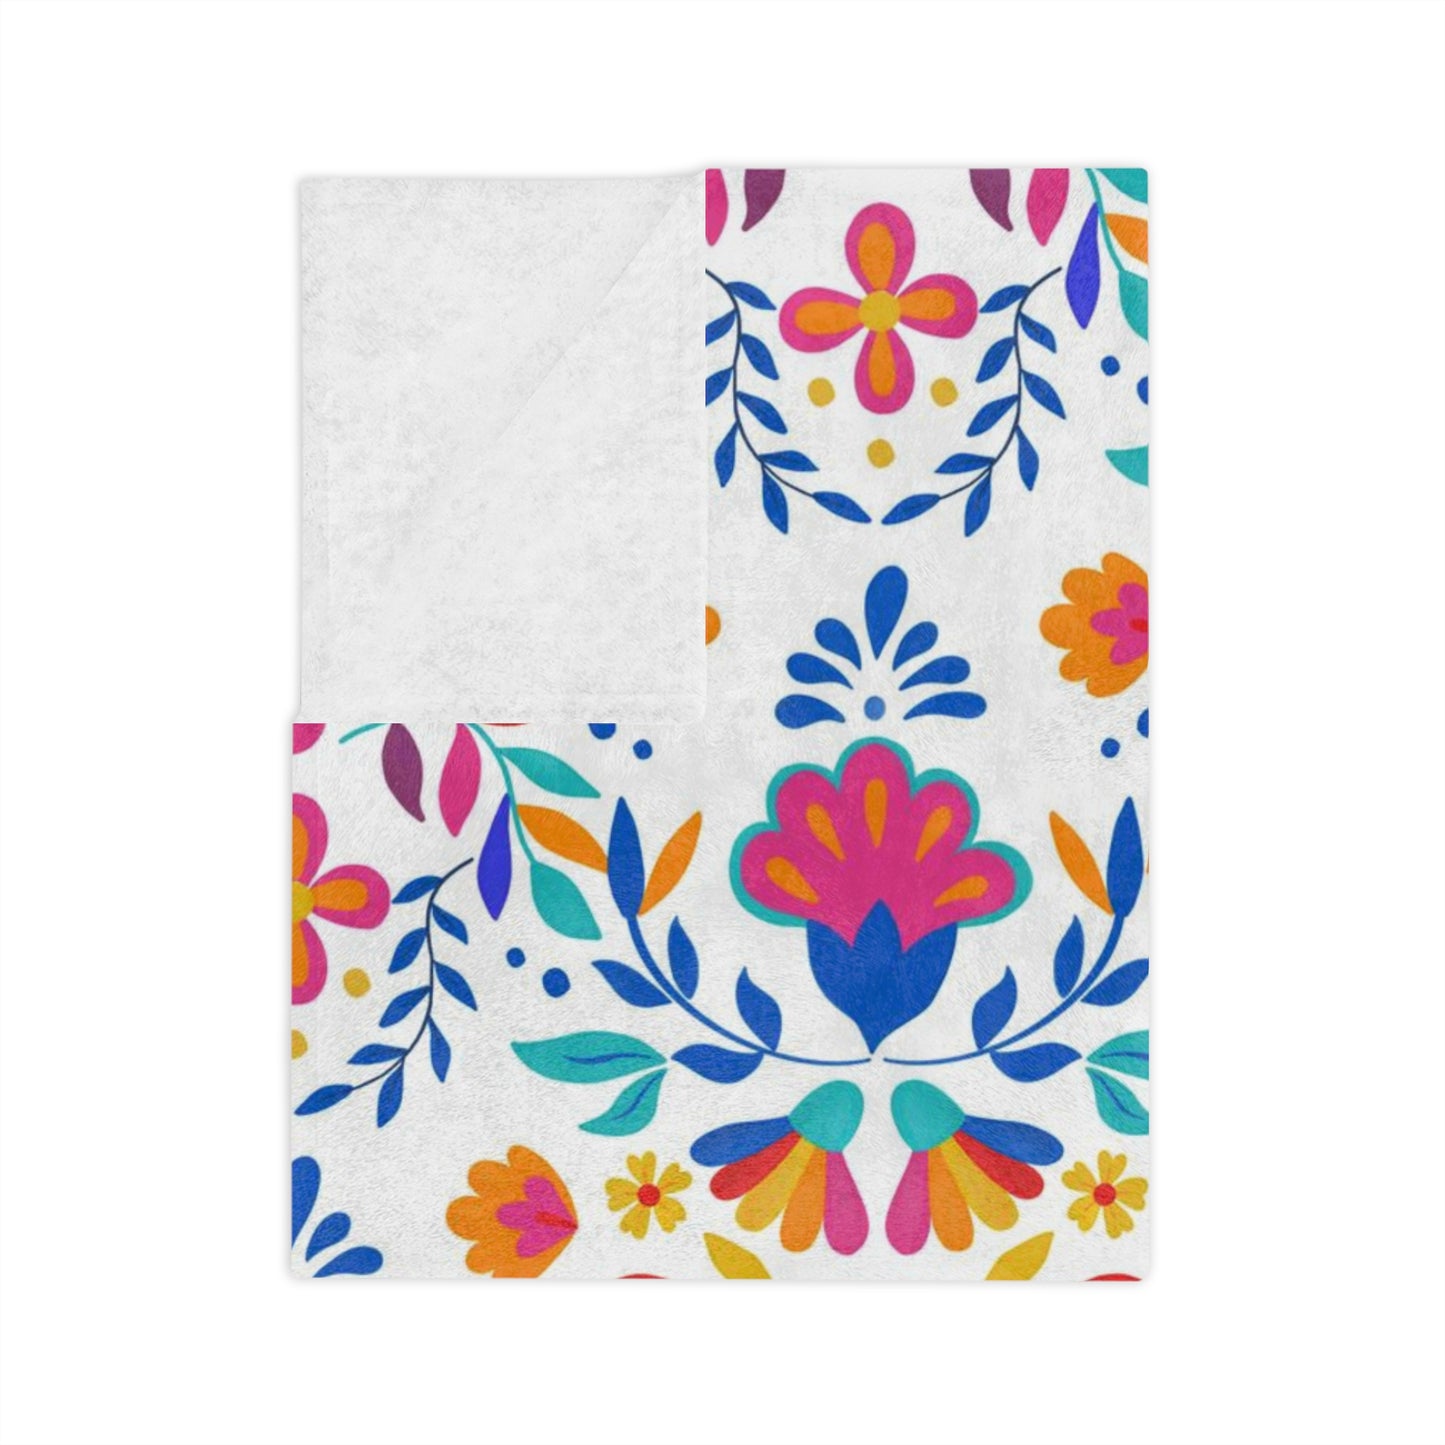 Mexican folk Blanket for her. Mexican home decor. Mexican flowers blanket.